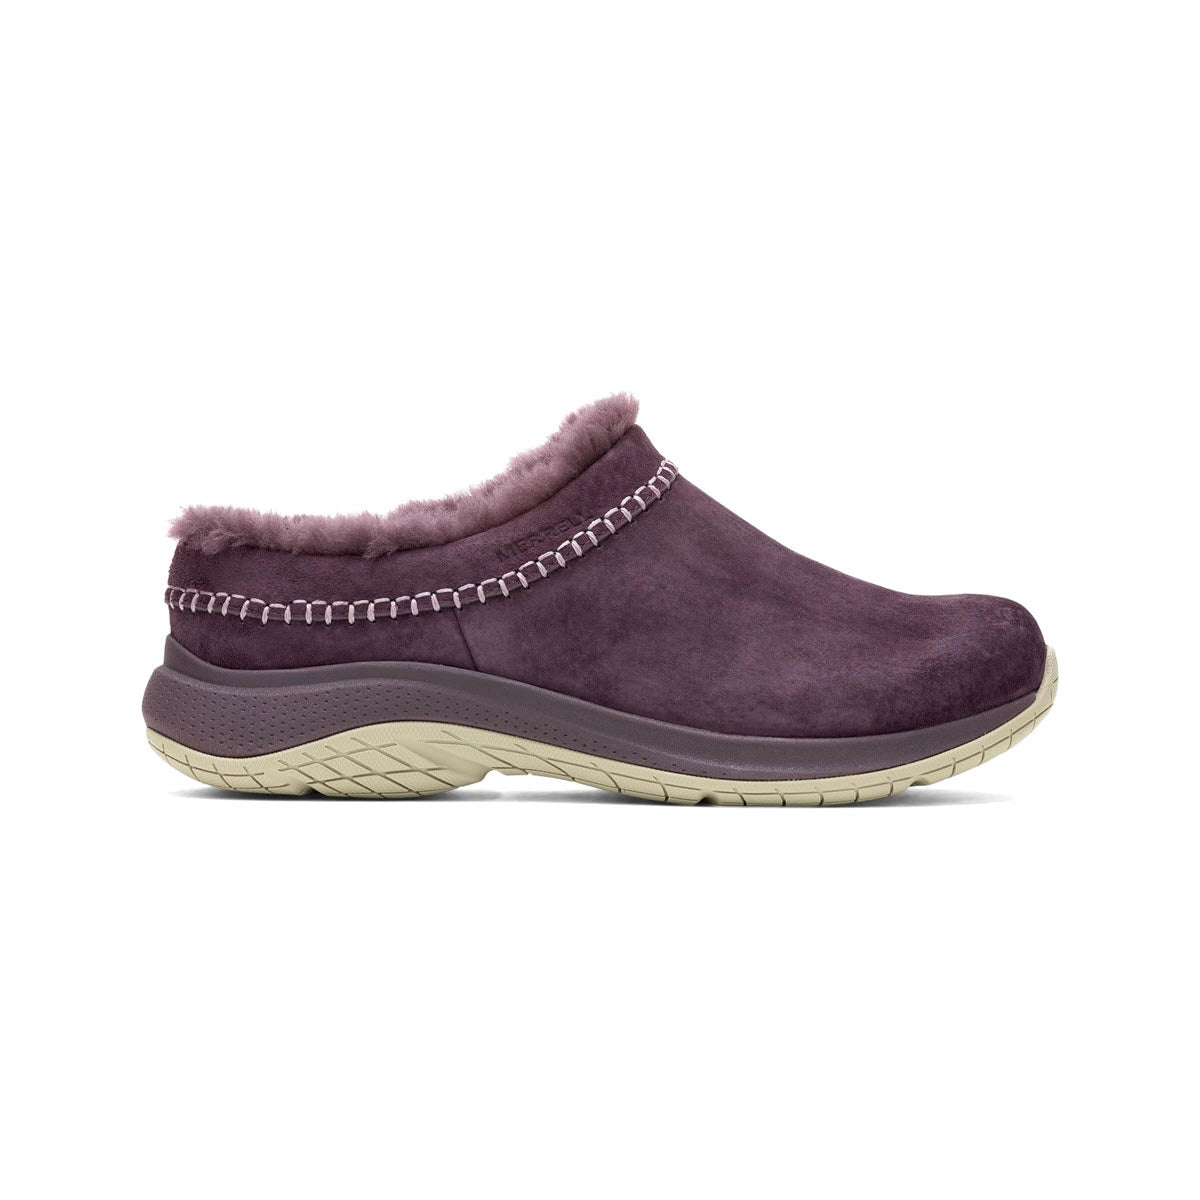 A side view of a single burgundy suede slip-on Merrell Encore Ice 5 with a sheepskin lining and a white rubber sole.